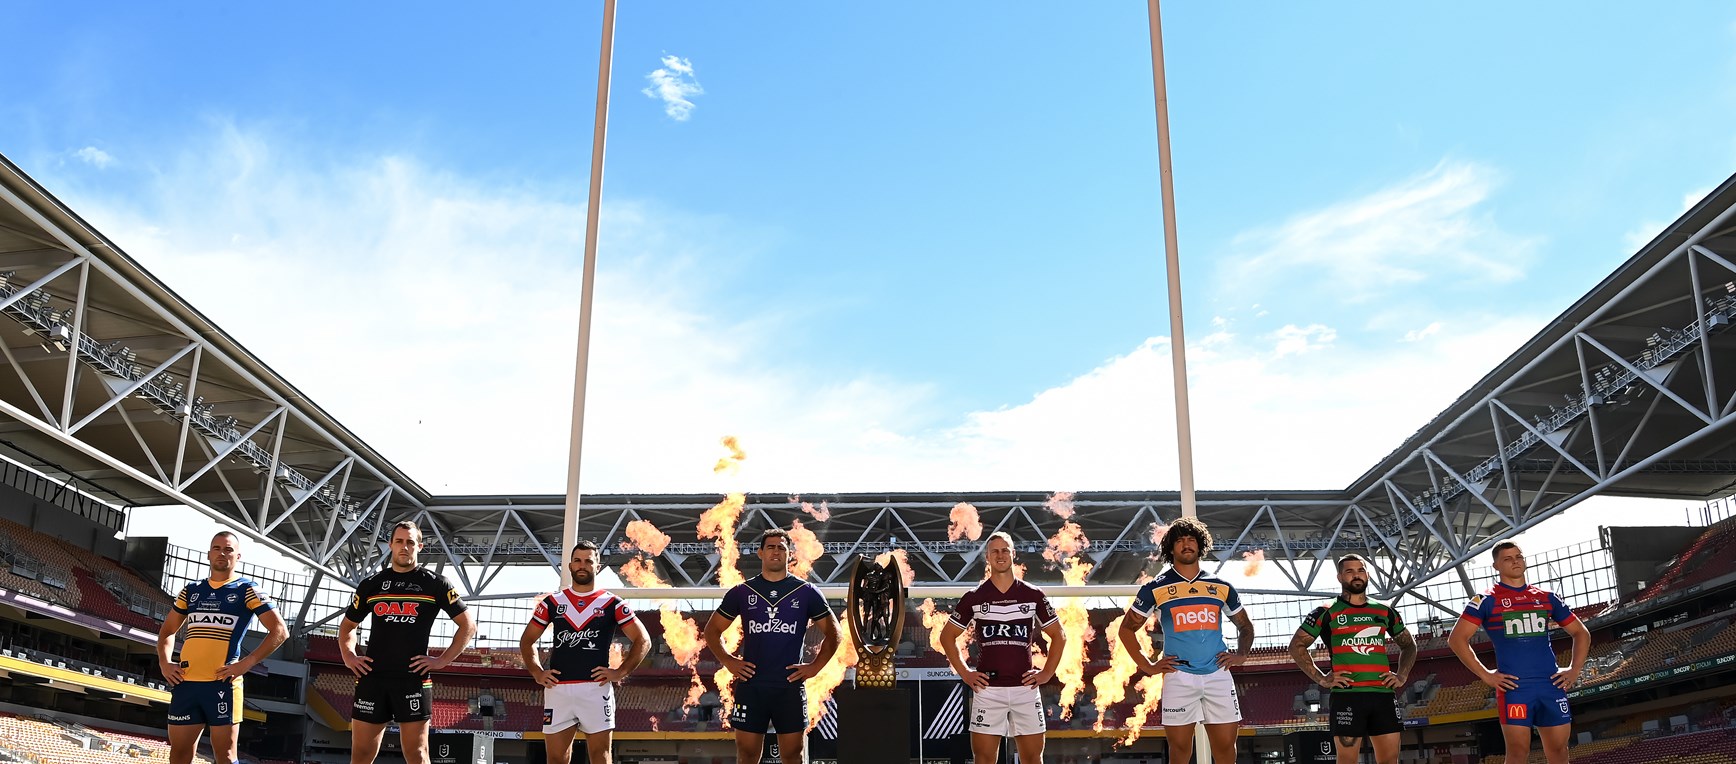 In pictures: NRL finals launch